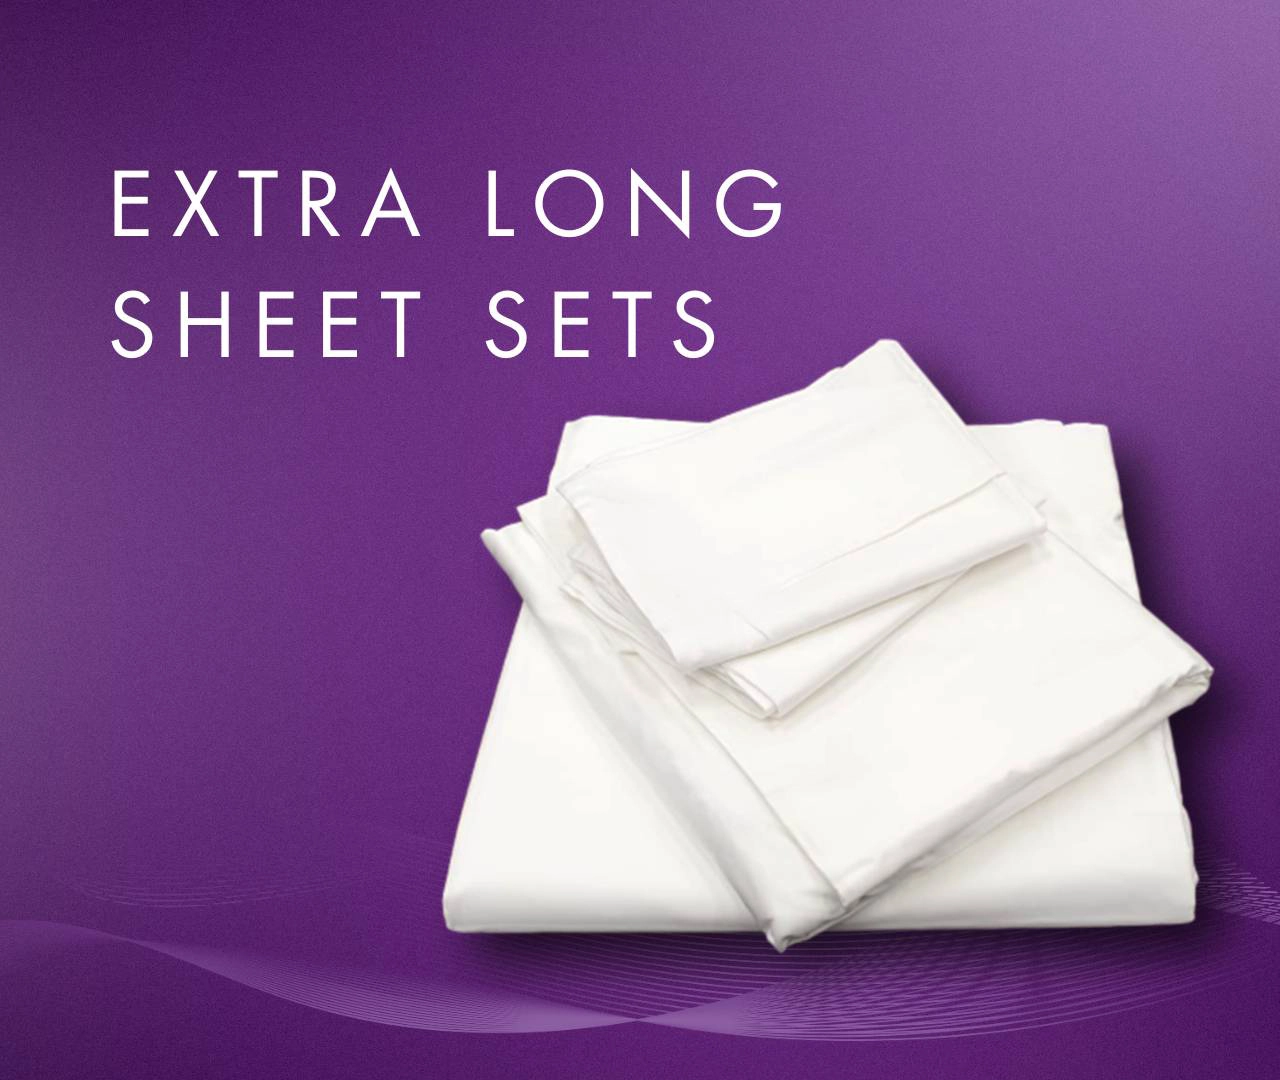 Now Available: Extra Long Sheet Sets